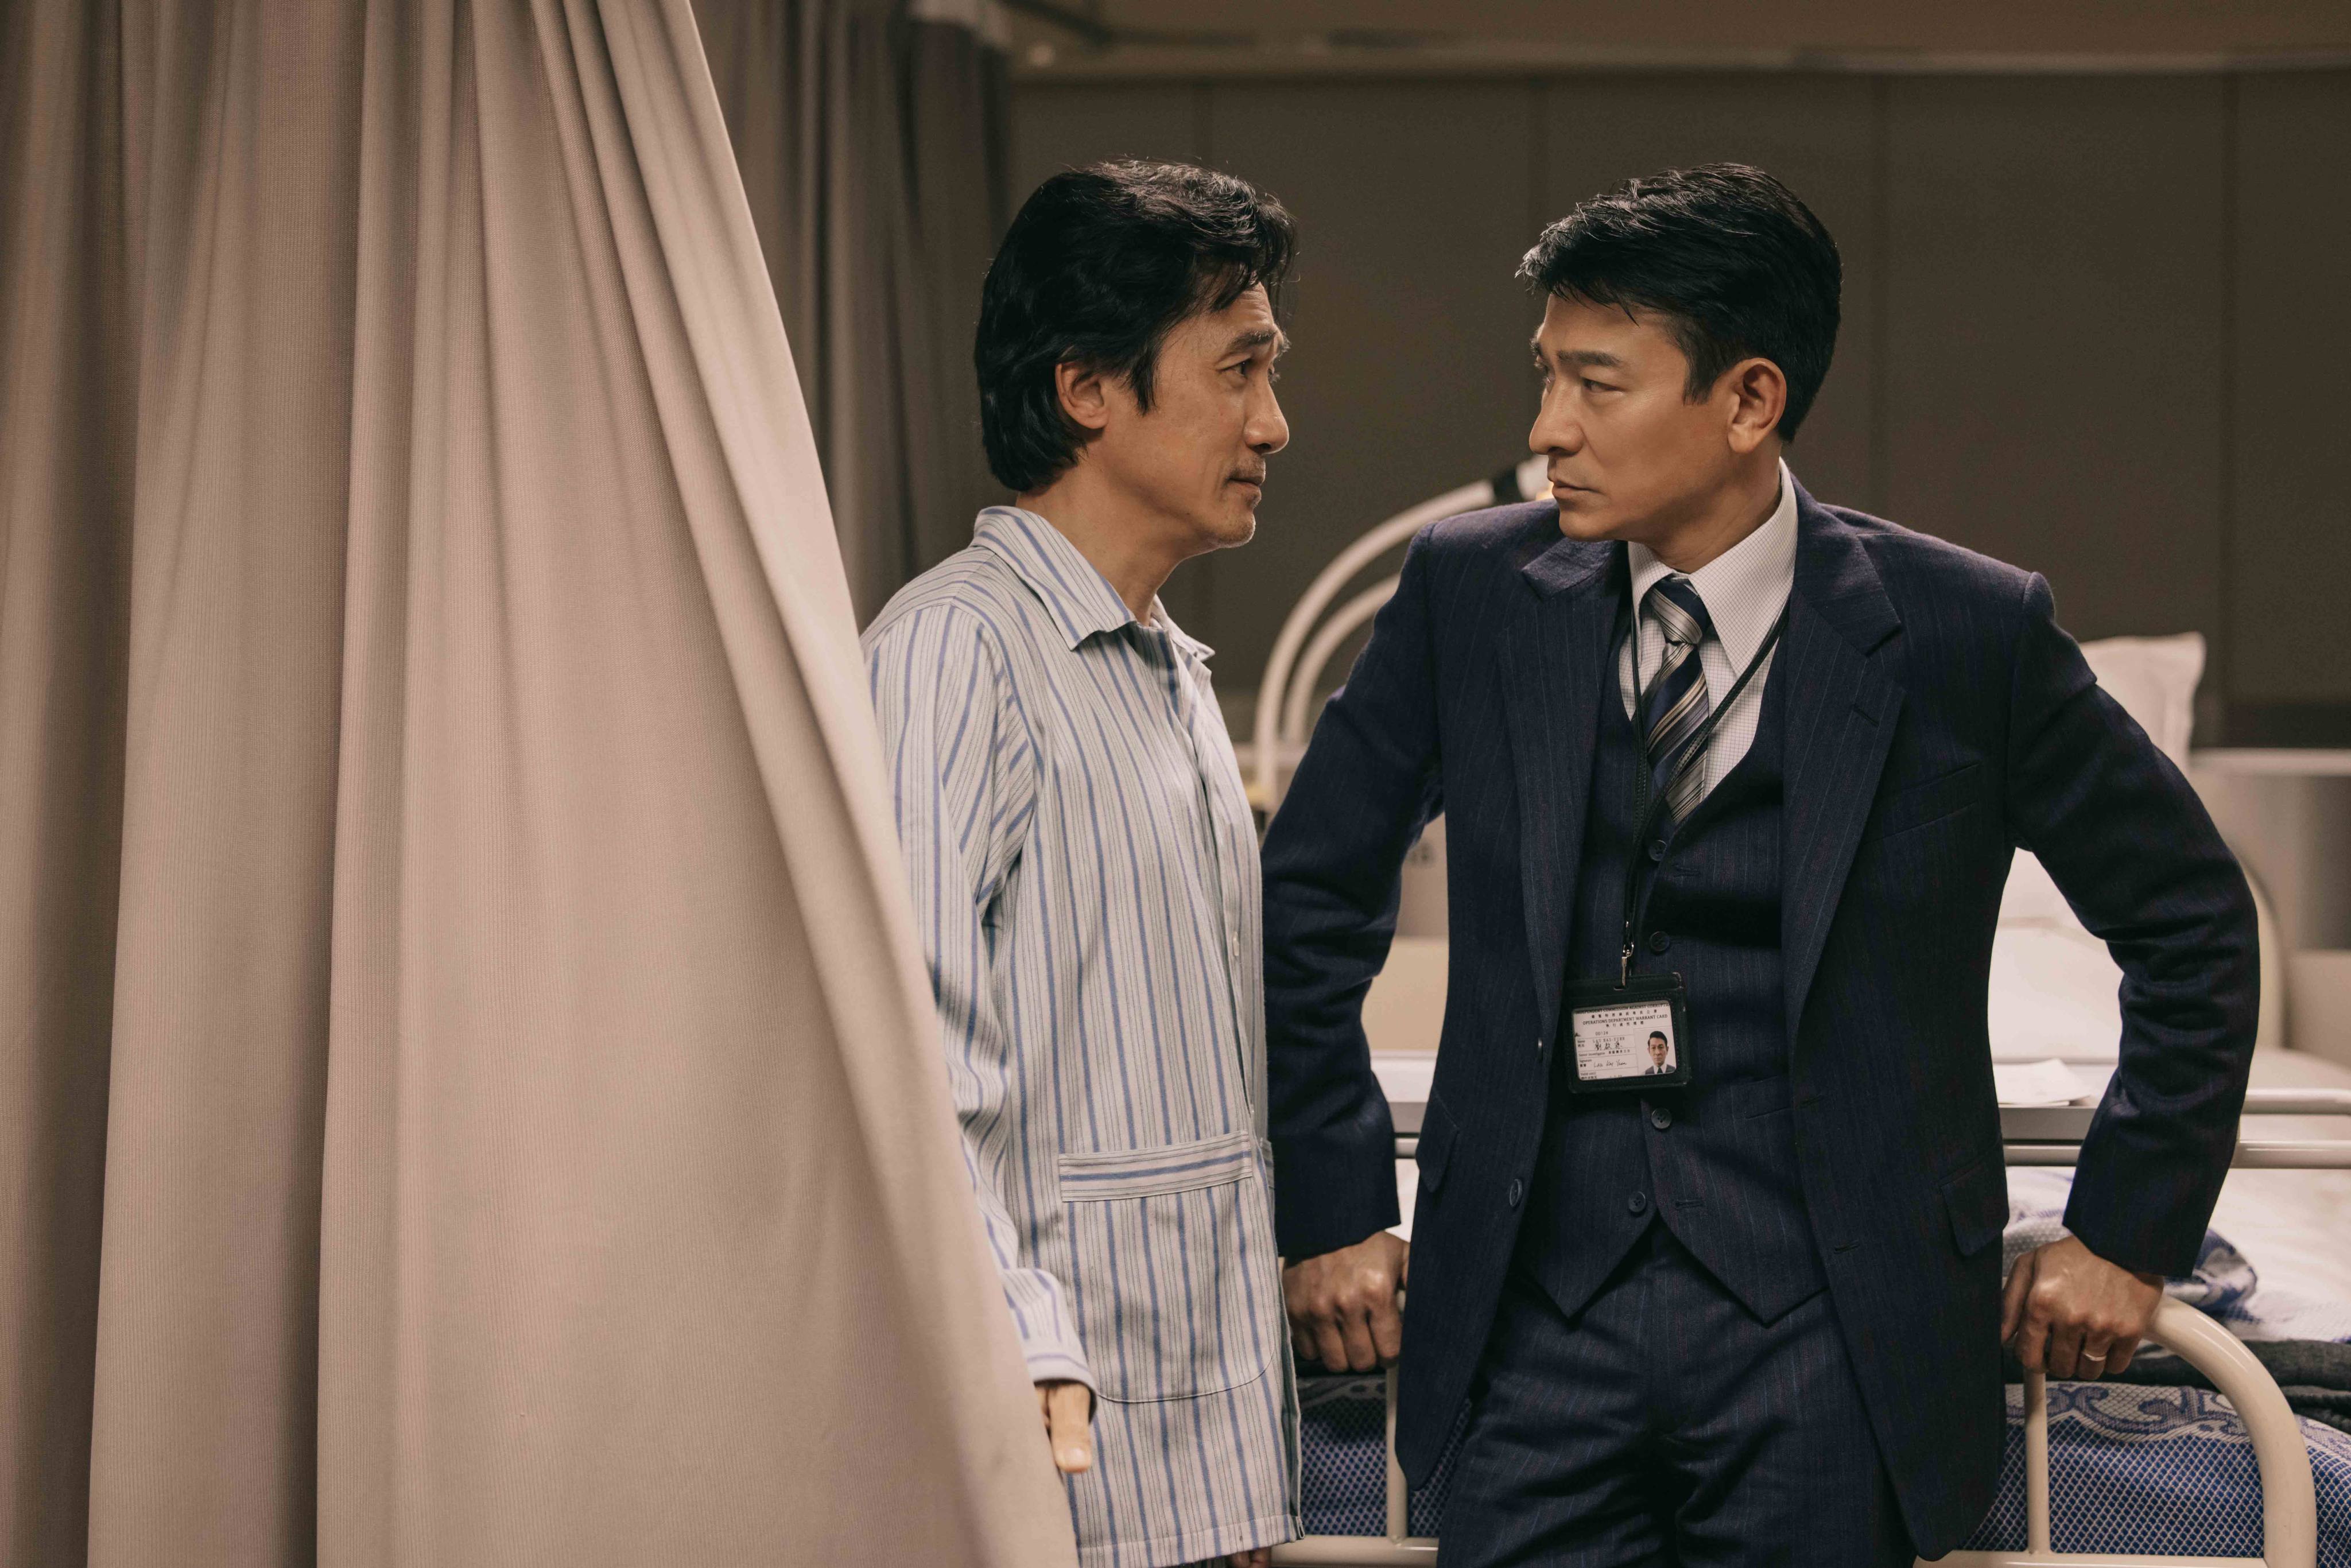 Tony Leung (left) and Andy Lau in a still from “The Goldfinger”.